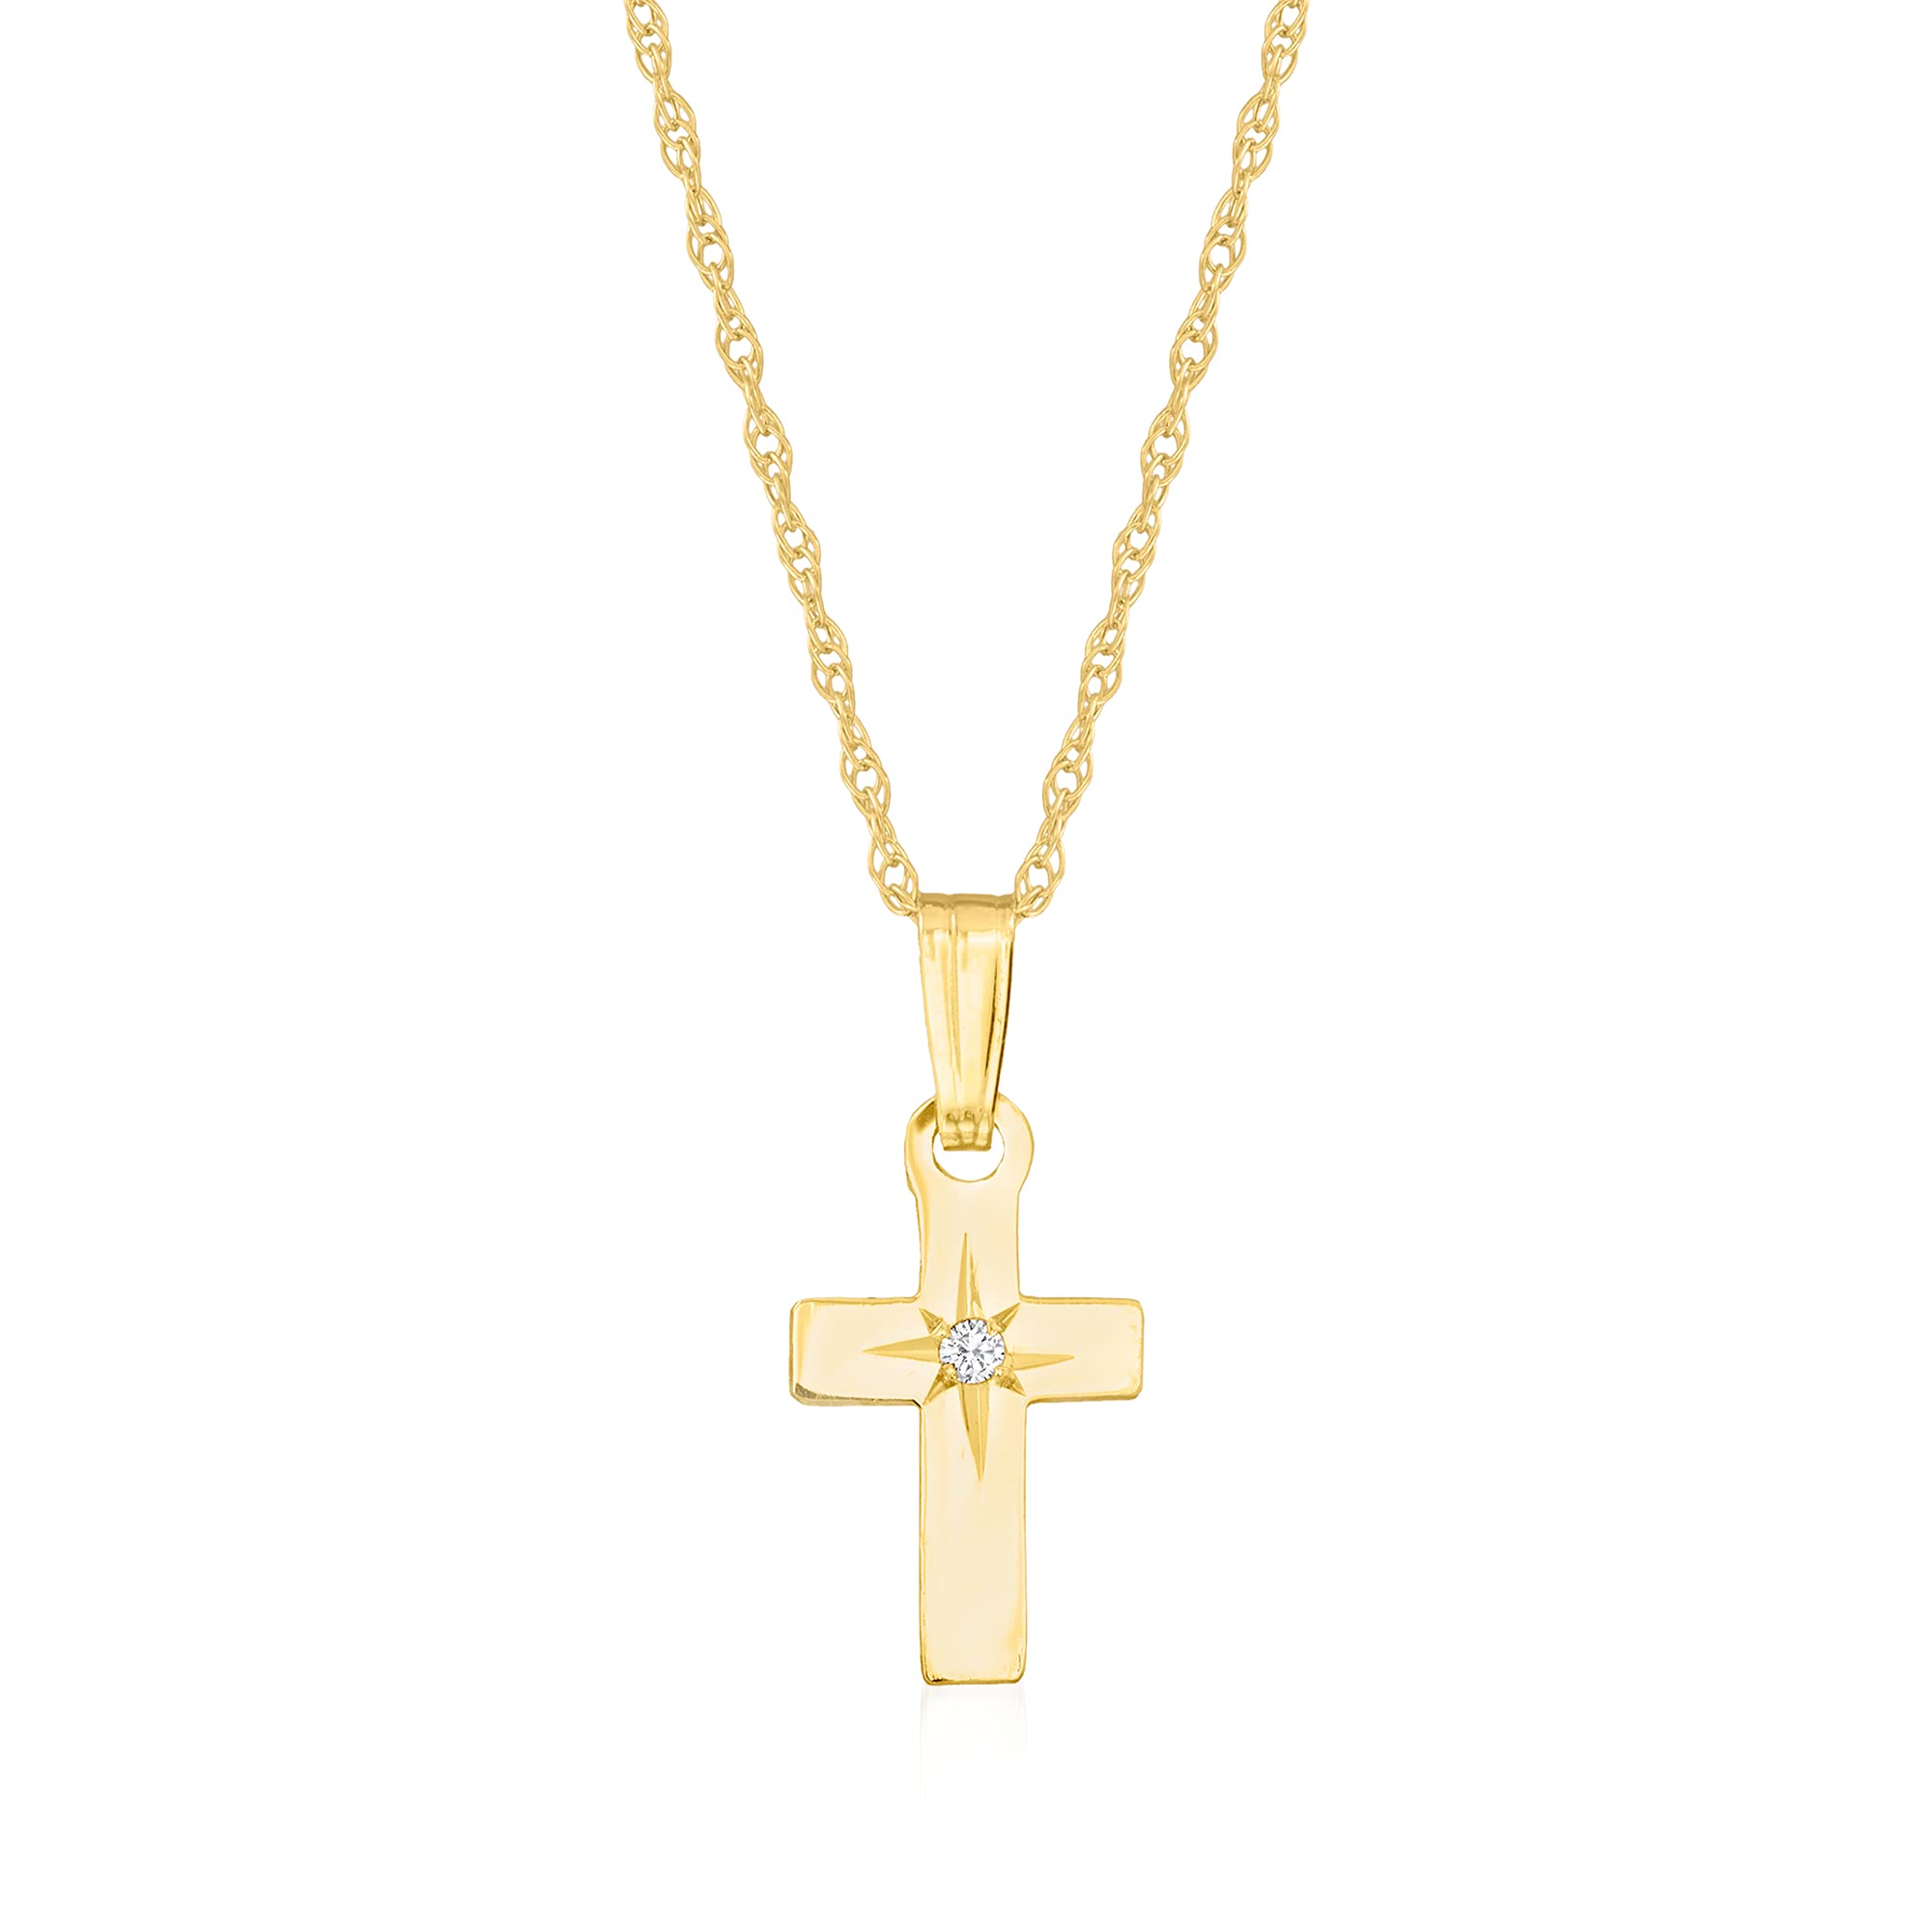 Ross-Simons Baby's 14kt Yellow Gold Cross Pendant Necklace With Diamond Accent. 13 inches